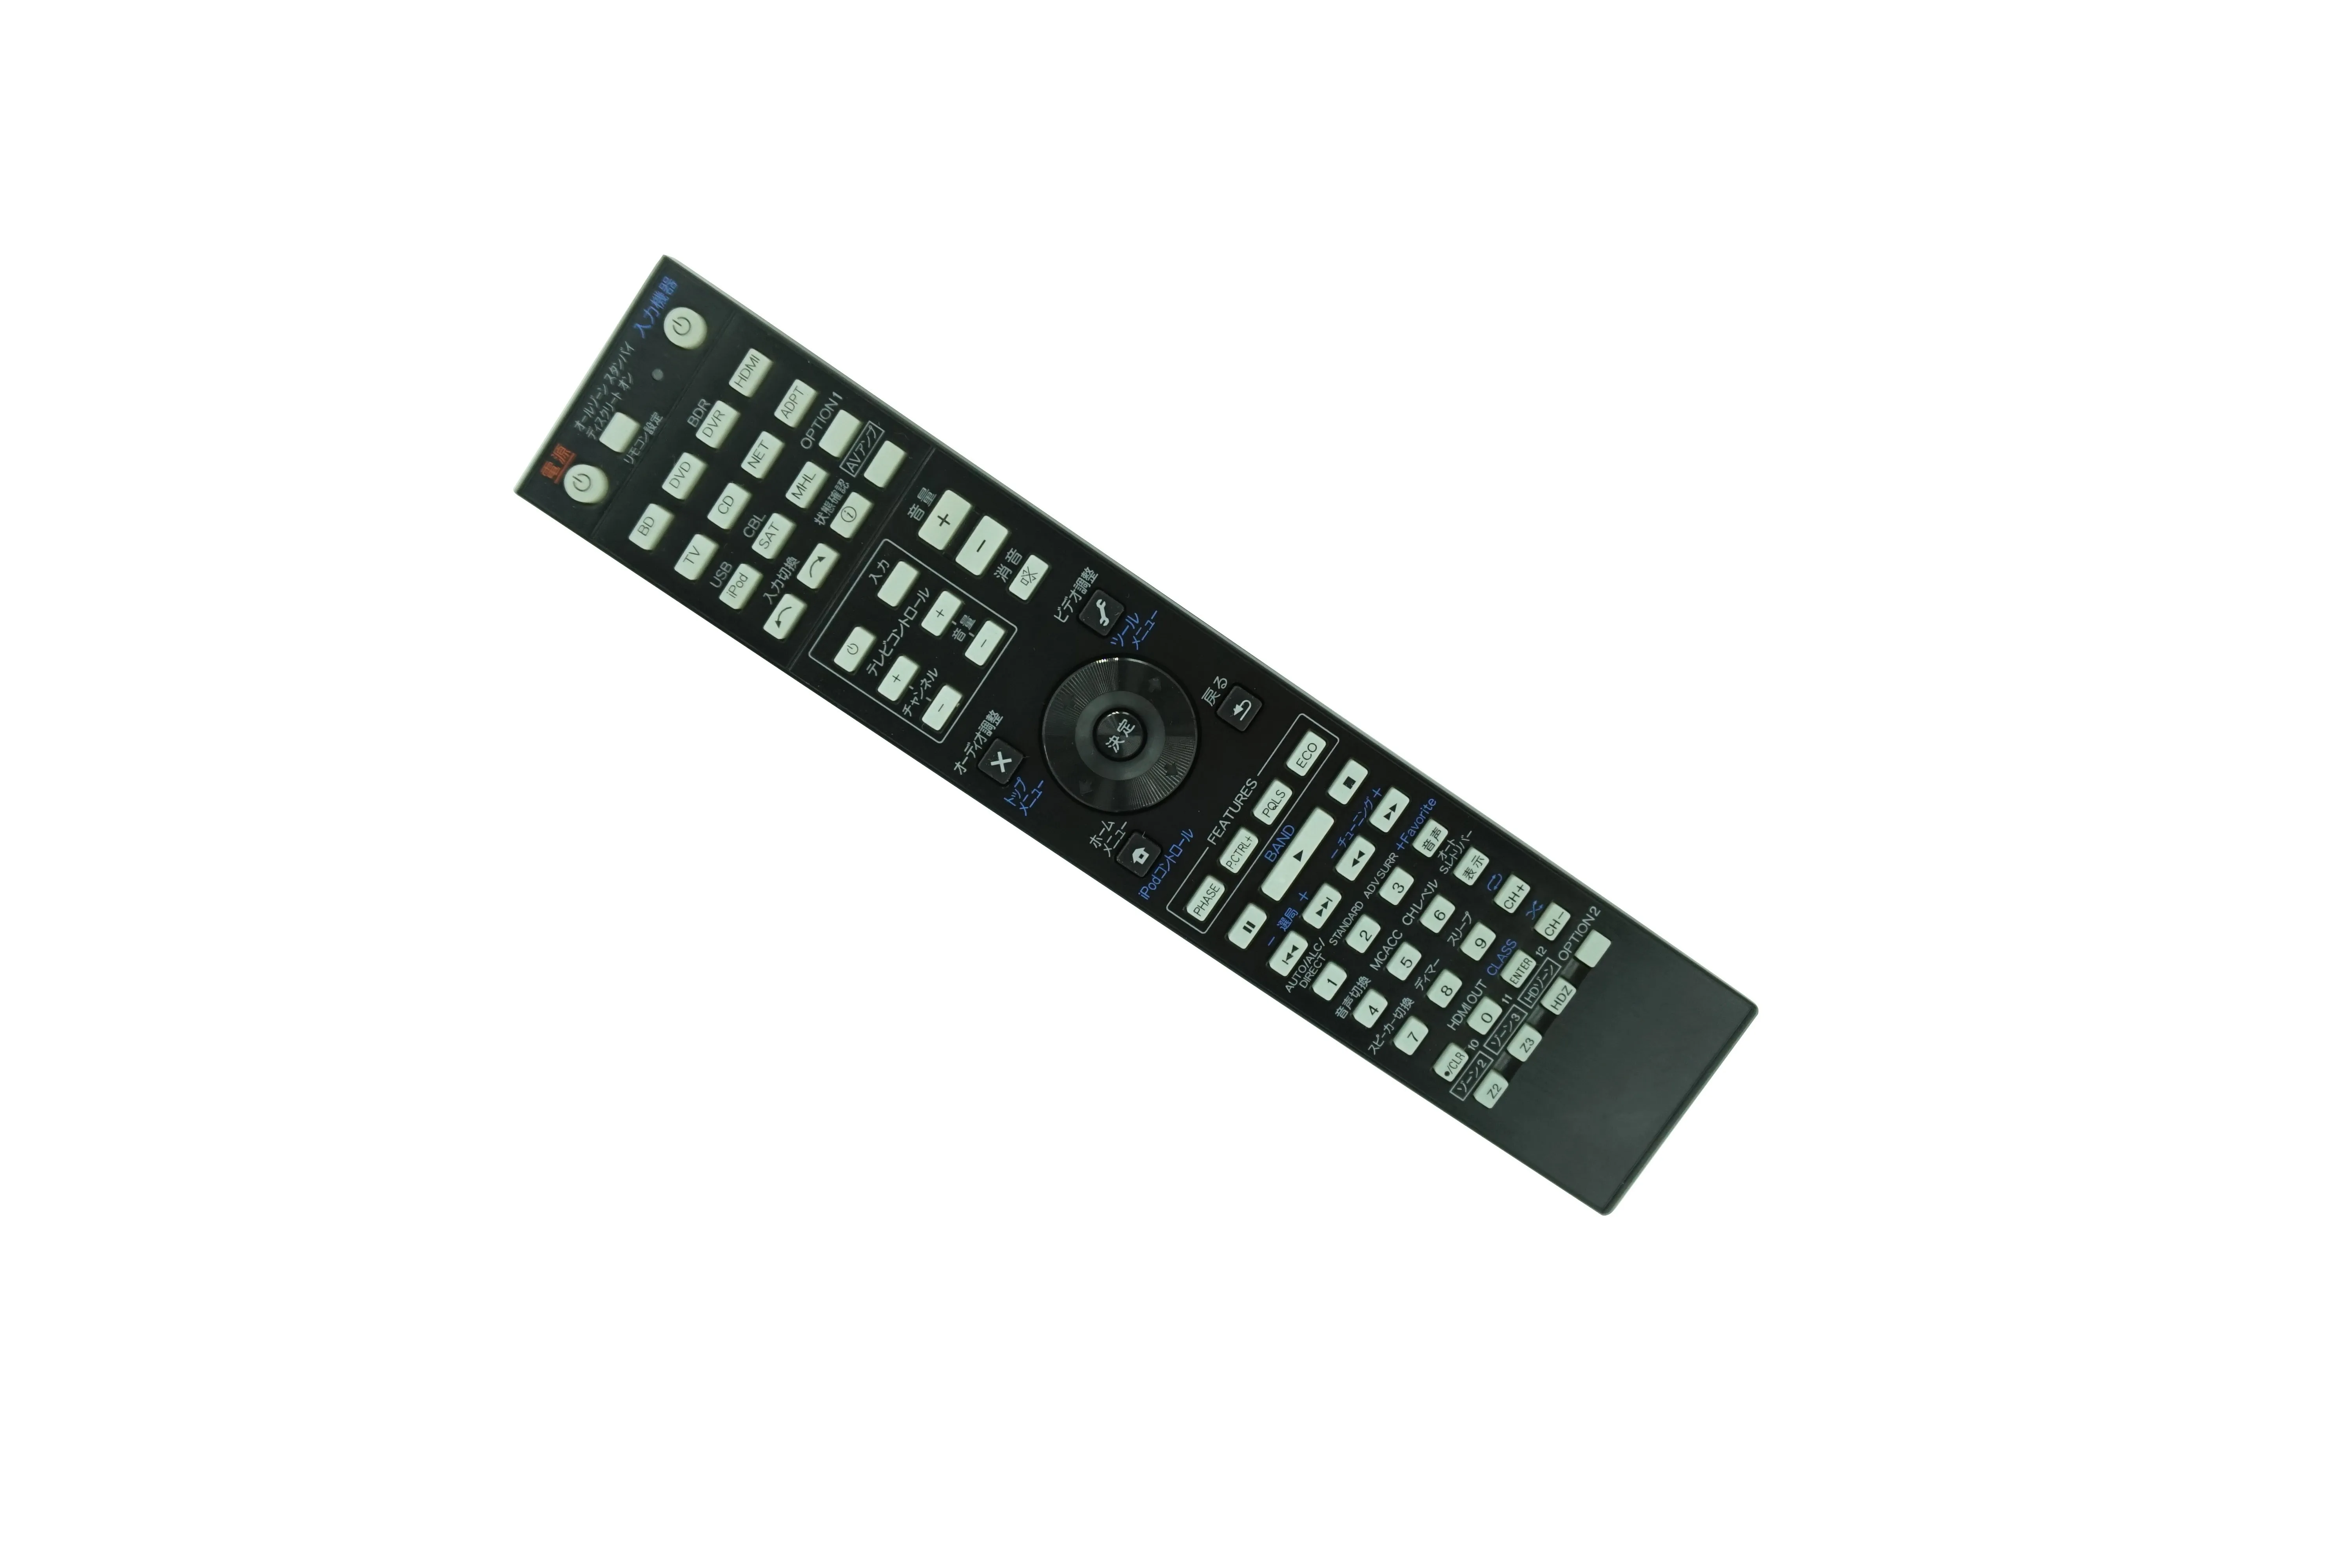 

Japanese Remote Control For Pioneer SC-LX88 SC-LX78 SC-LX58 AXD7667 SC-2022 AXD7669 SC-LX86 SC-LX76 Network AV A/V Receiver